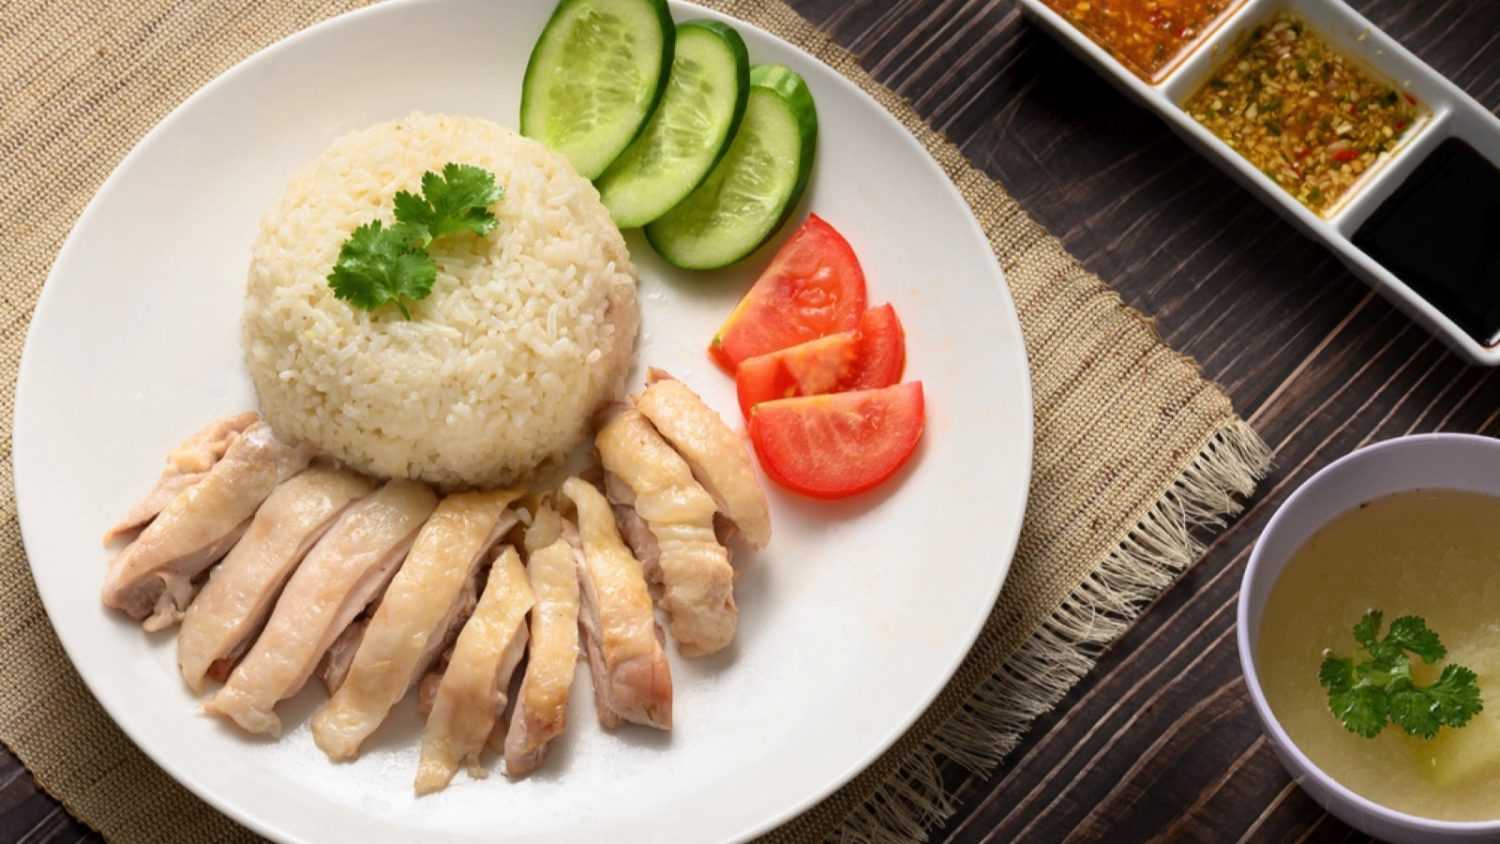 Hainanese chicken rice with soup and three sauces on dark wood table texture